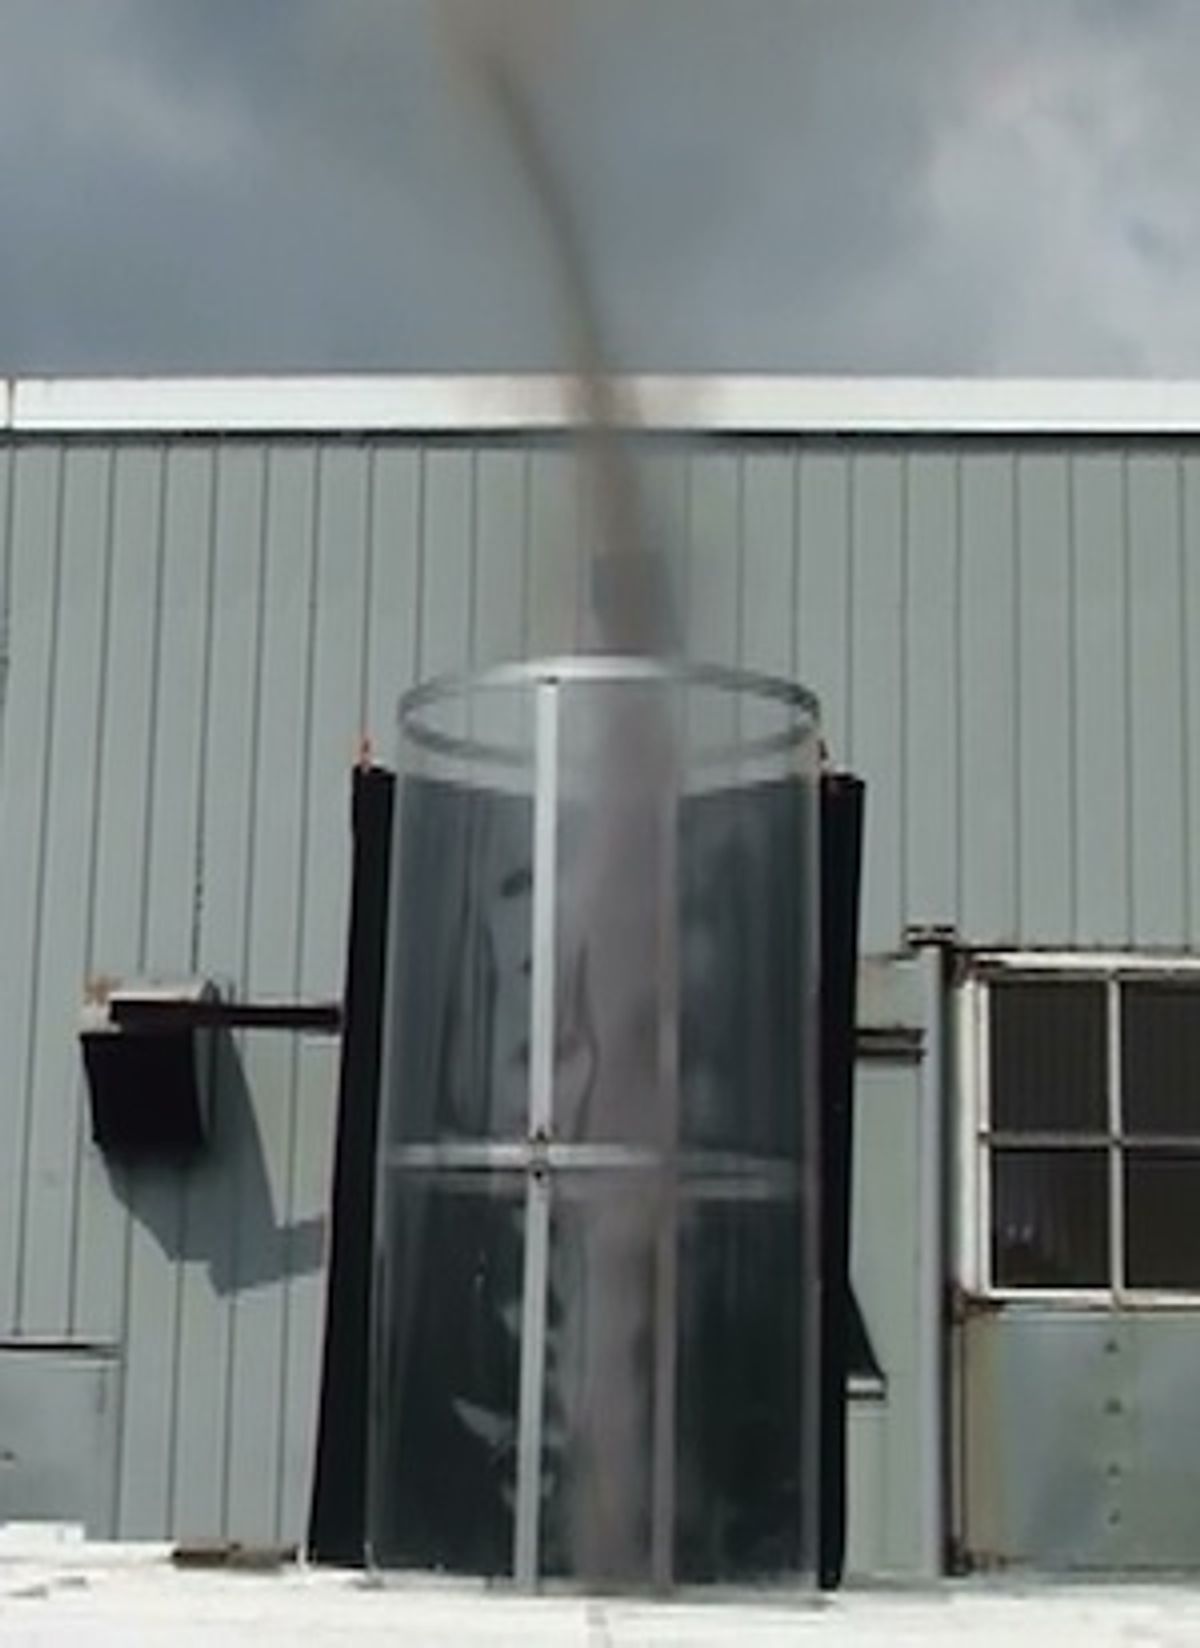 Tornado Power: Breakout Labs Funds Research Into Energy-Generating Vortex